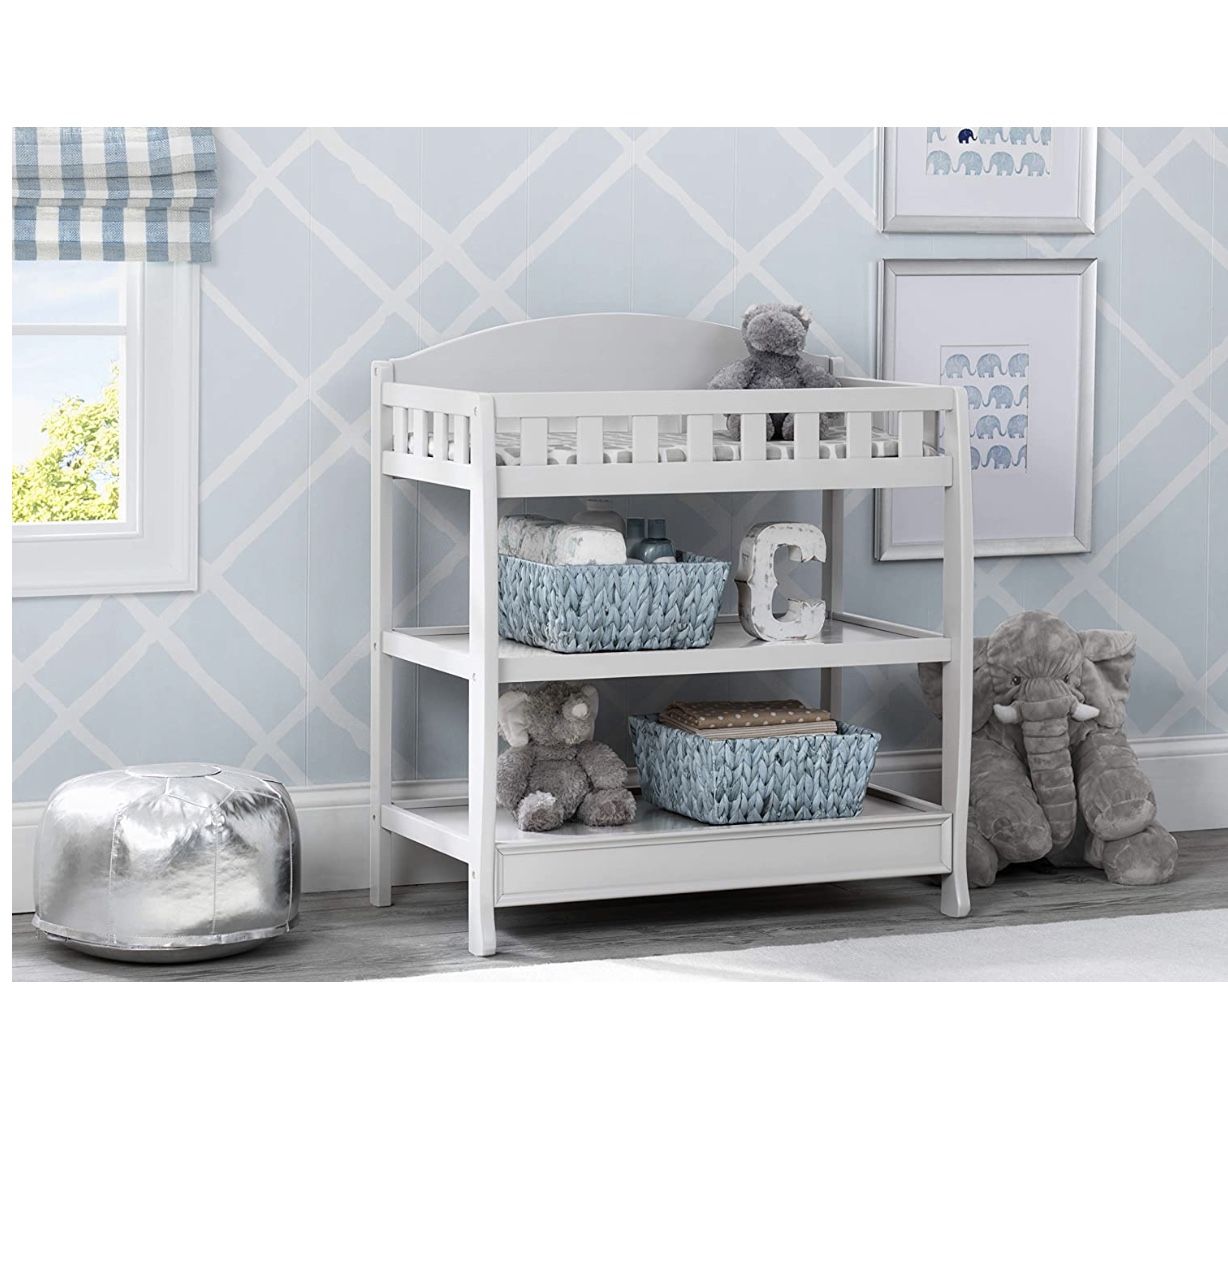 Delta White Changing Table